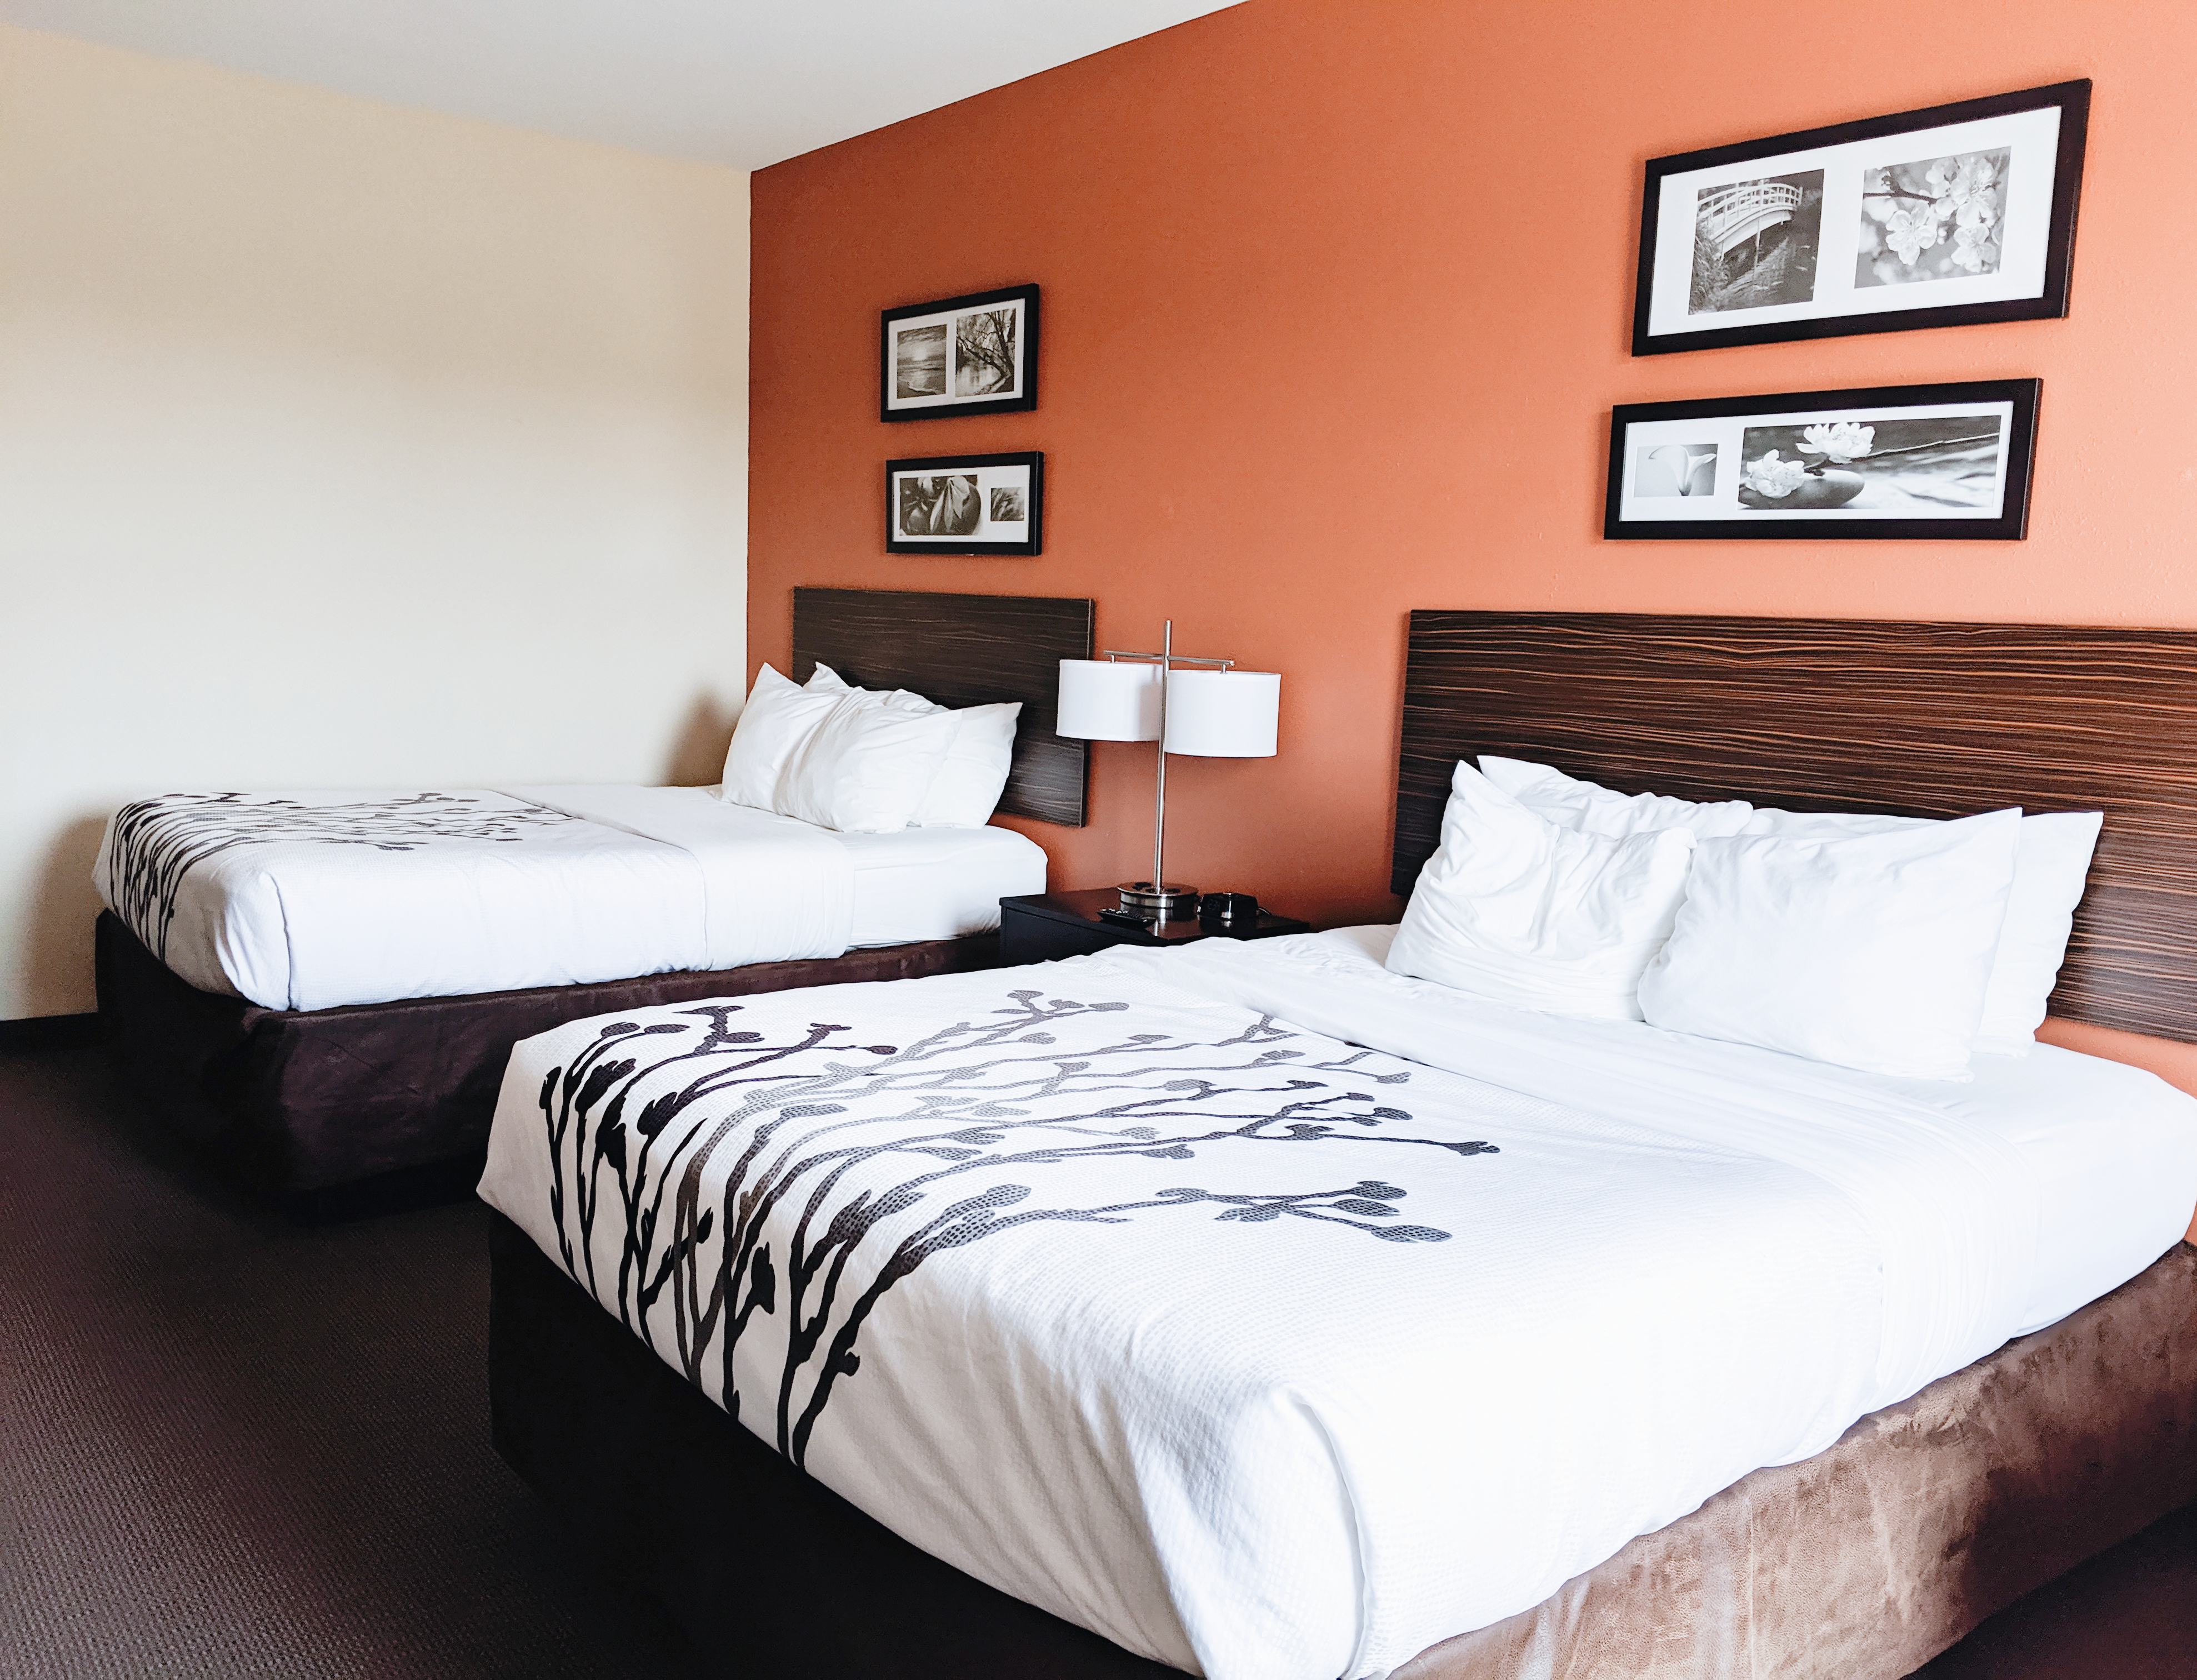 Sleep Inn Dyersburg TN Review - Dyersburg TN Hotels: Detailed Sleep Inn Dyersburg TN reviews with 15 photos and updated information as of fall 2019. Find out why Sleep Inn is one of the best hotels in Dyersburg, TN in this Dyersburg TN Travel Guide. (ad) #madeintn #dyersburg #dyersburgtn #tennessee 